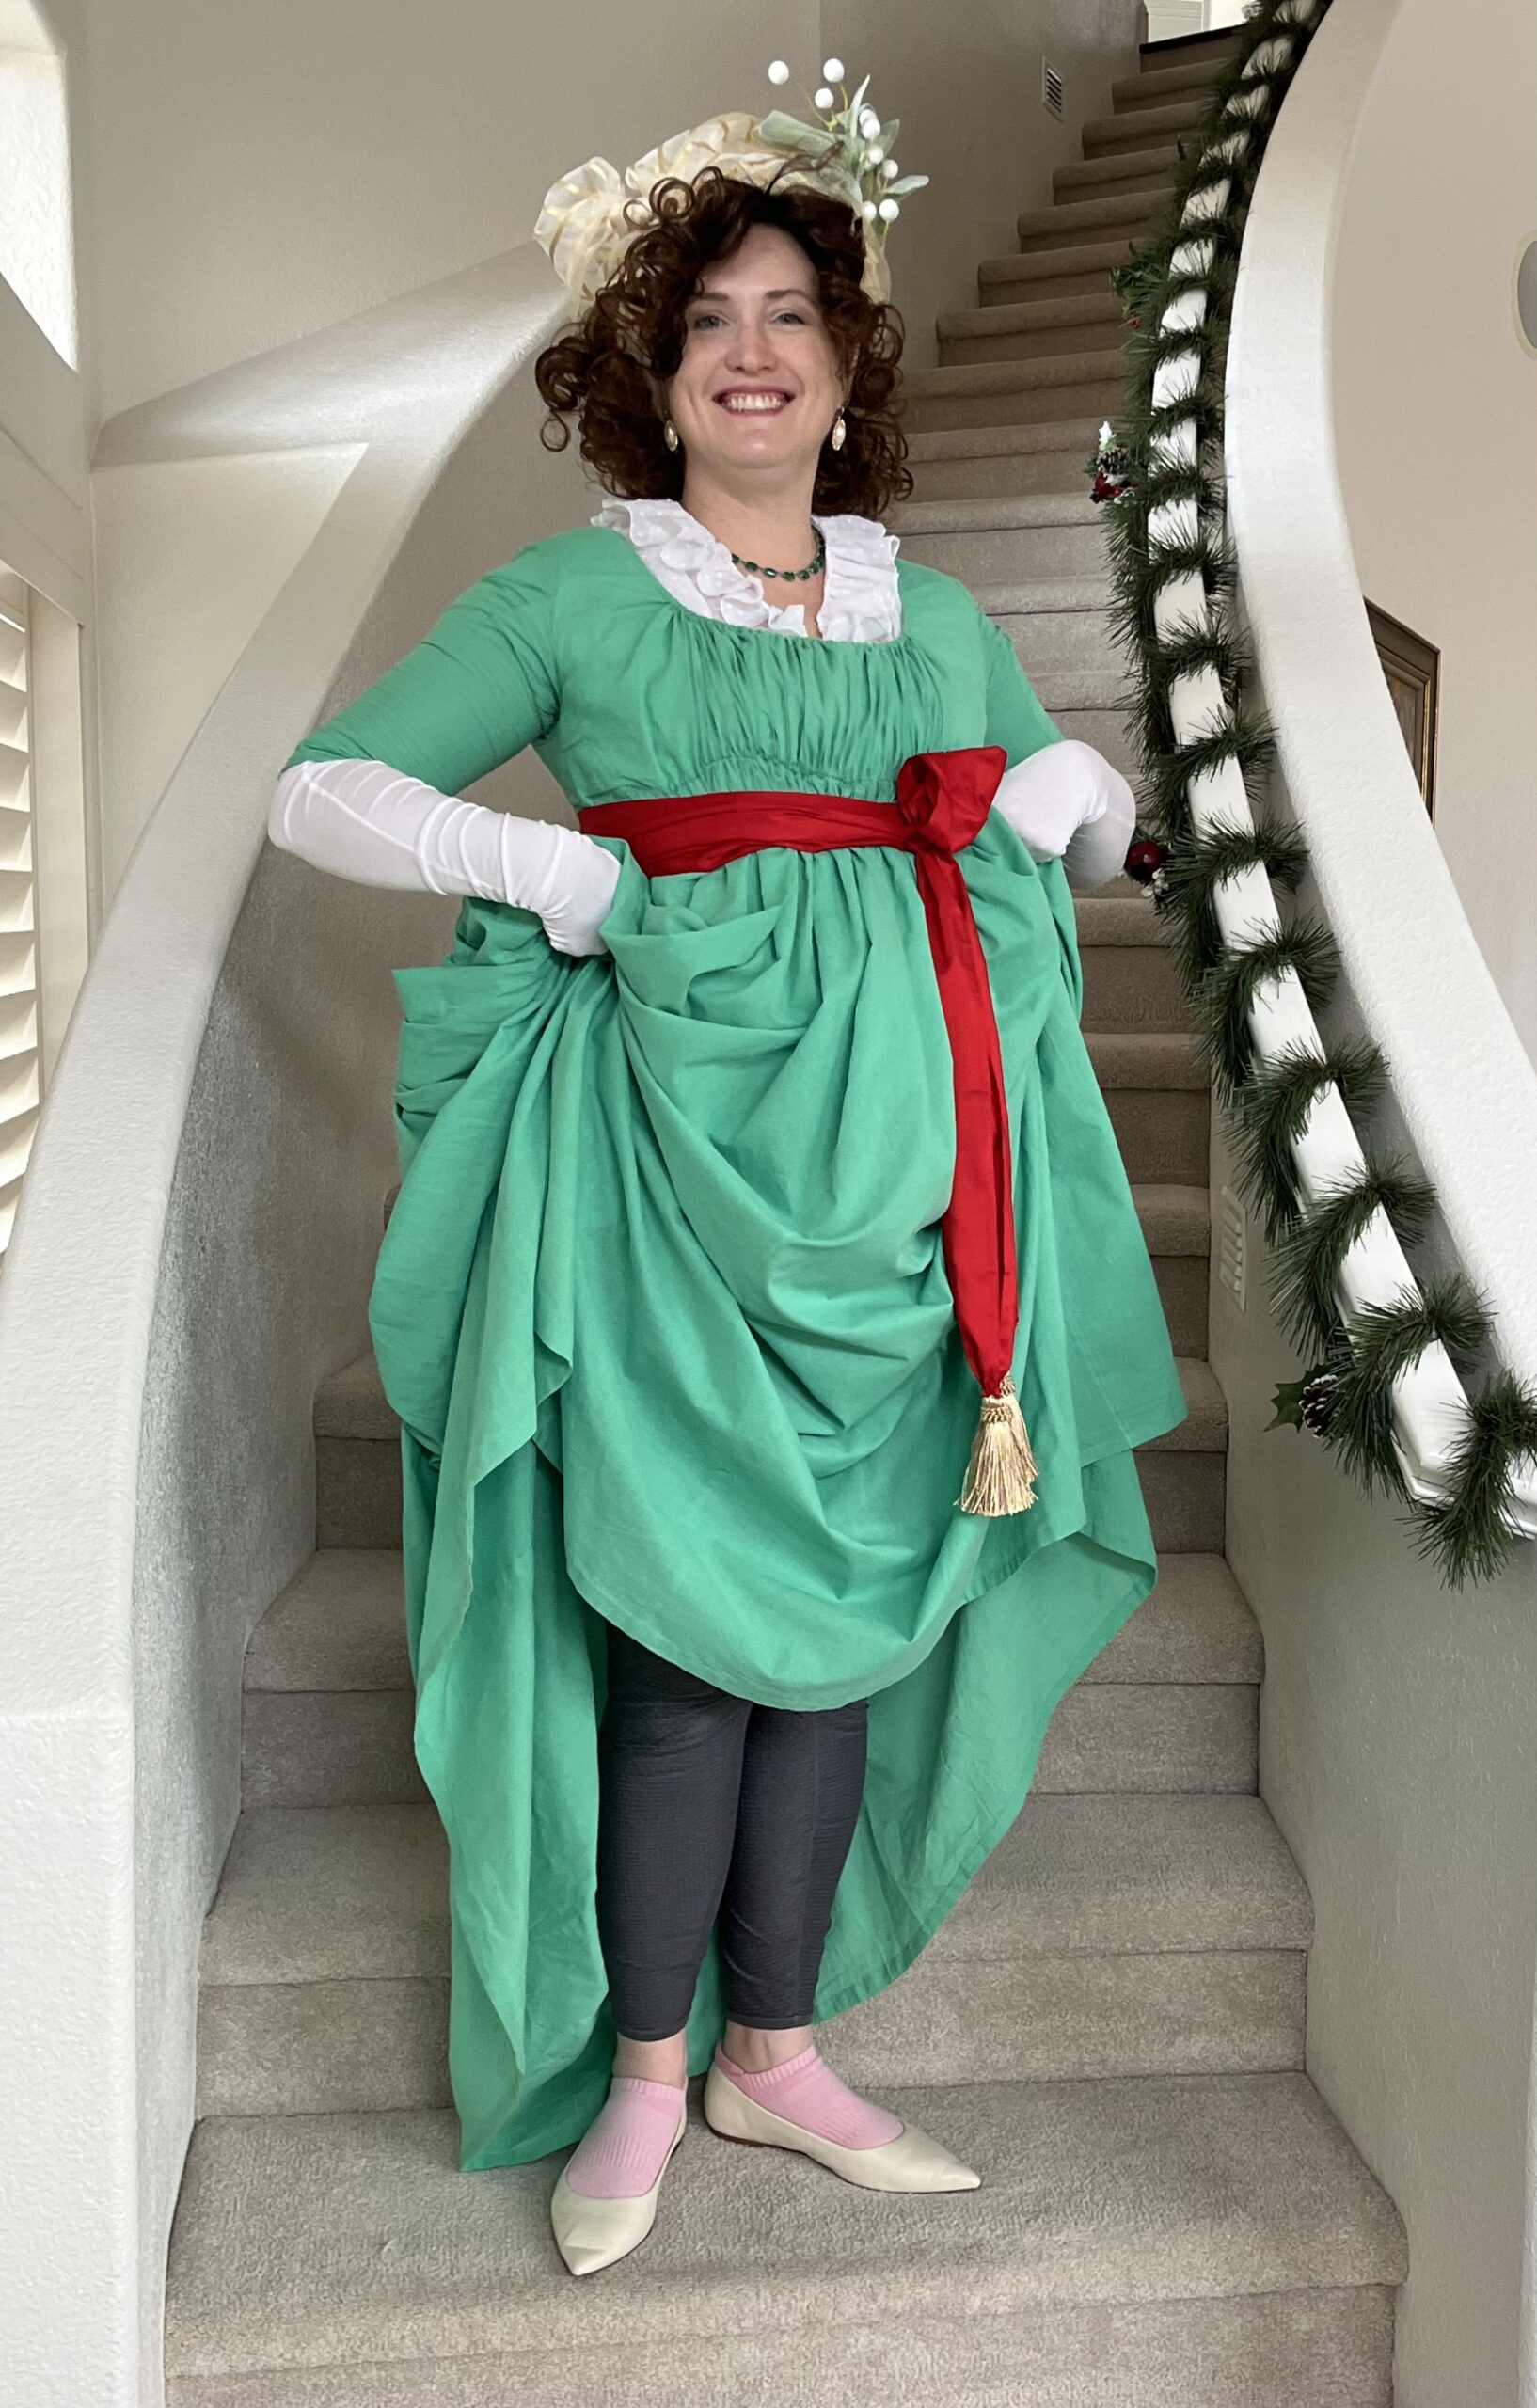 Tabubilgirl stands on a flight of stairs. She wears a green 1790s round gown. she is lifting up the skirts to show off modern thermal underwear